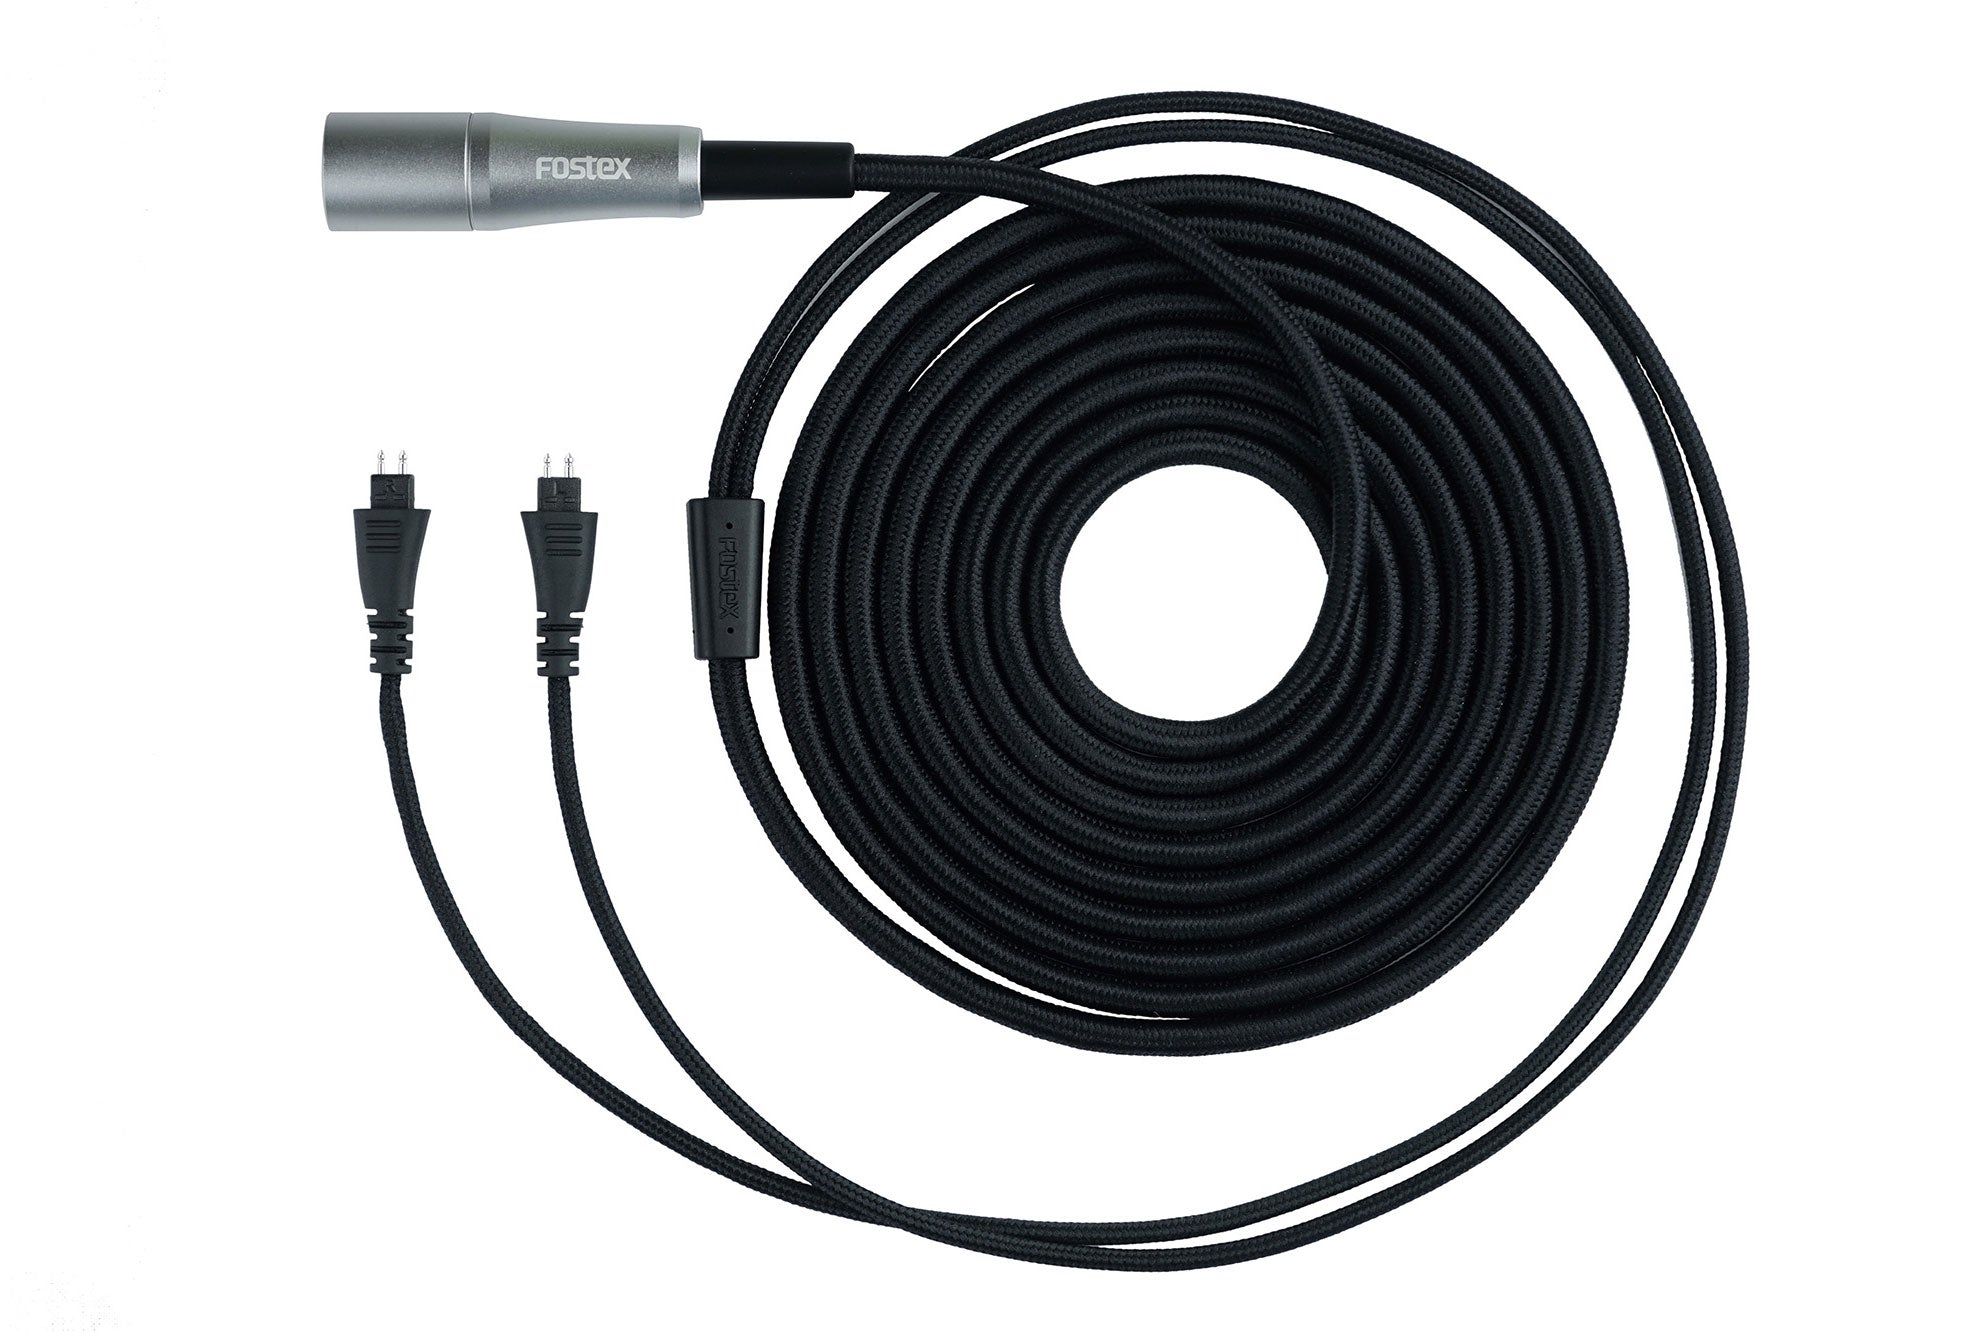 Fostex ET-H3.0N7BL - Balanced Cable Optional for TH-900mk2